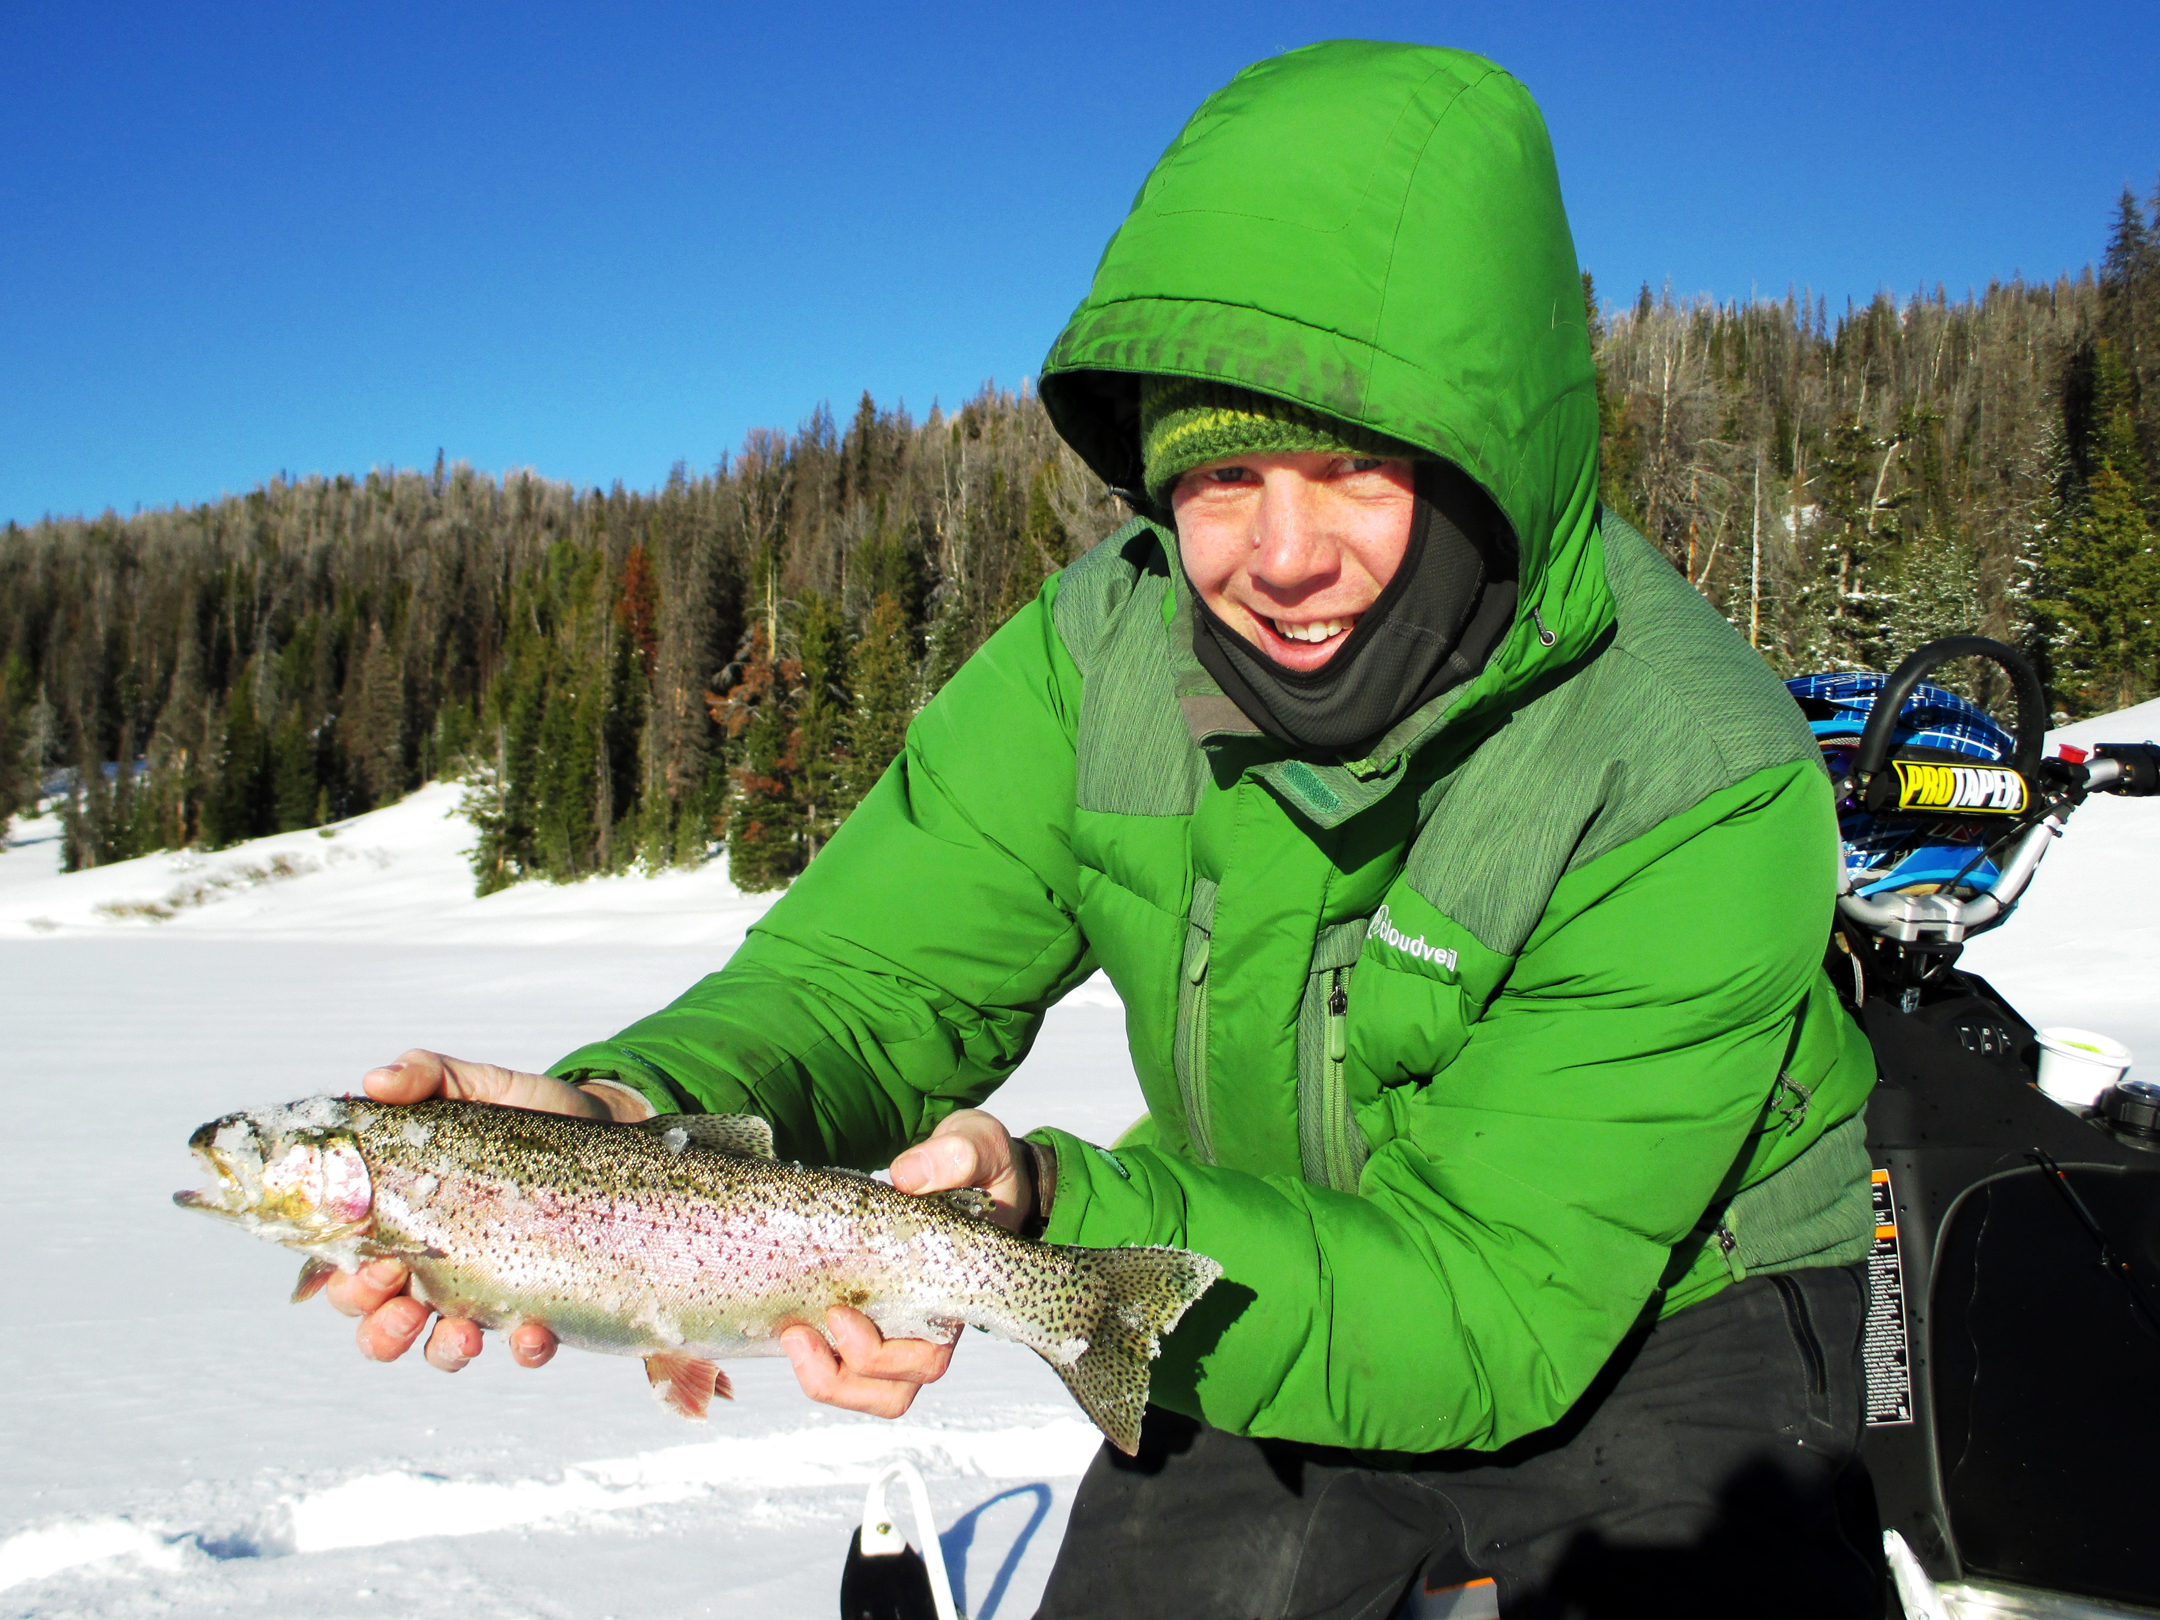 Ice fishing in the lakes and rivers surrounding Brooks Lake Lodge & Spa is another way for guests to take advantage of the snowy Rocky Mountain backcountry property.